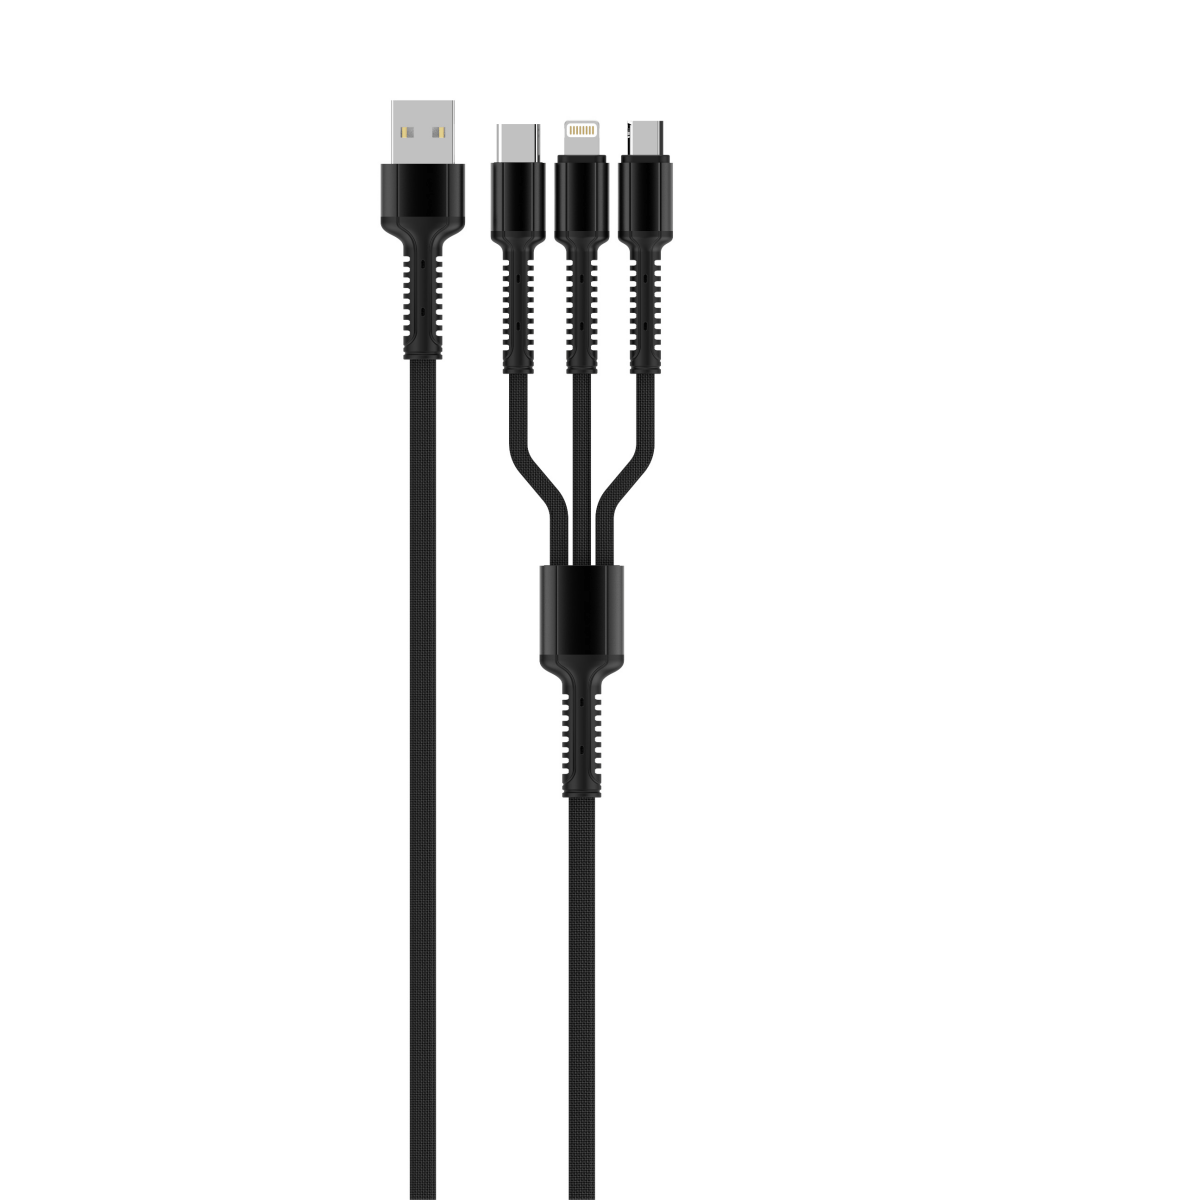 LDNIO LC93 3-in1 3A Fast Charging Cable-Black - Hugmie